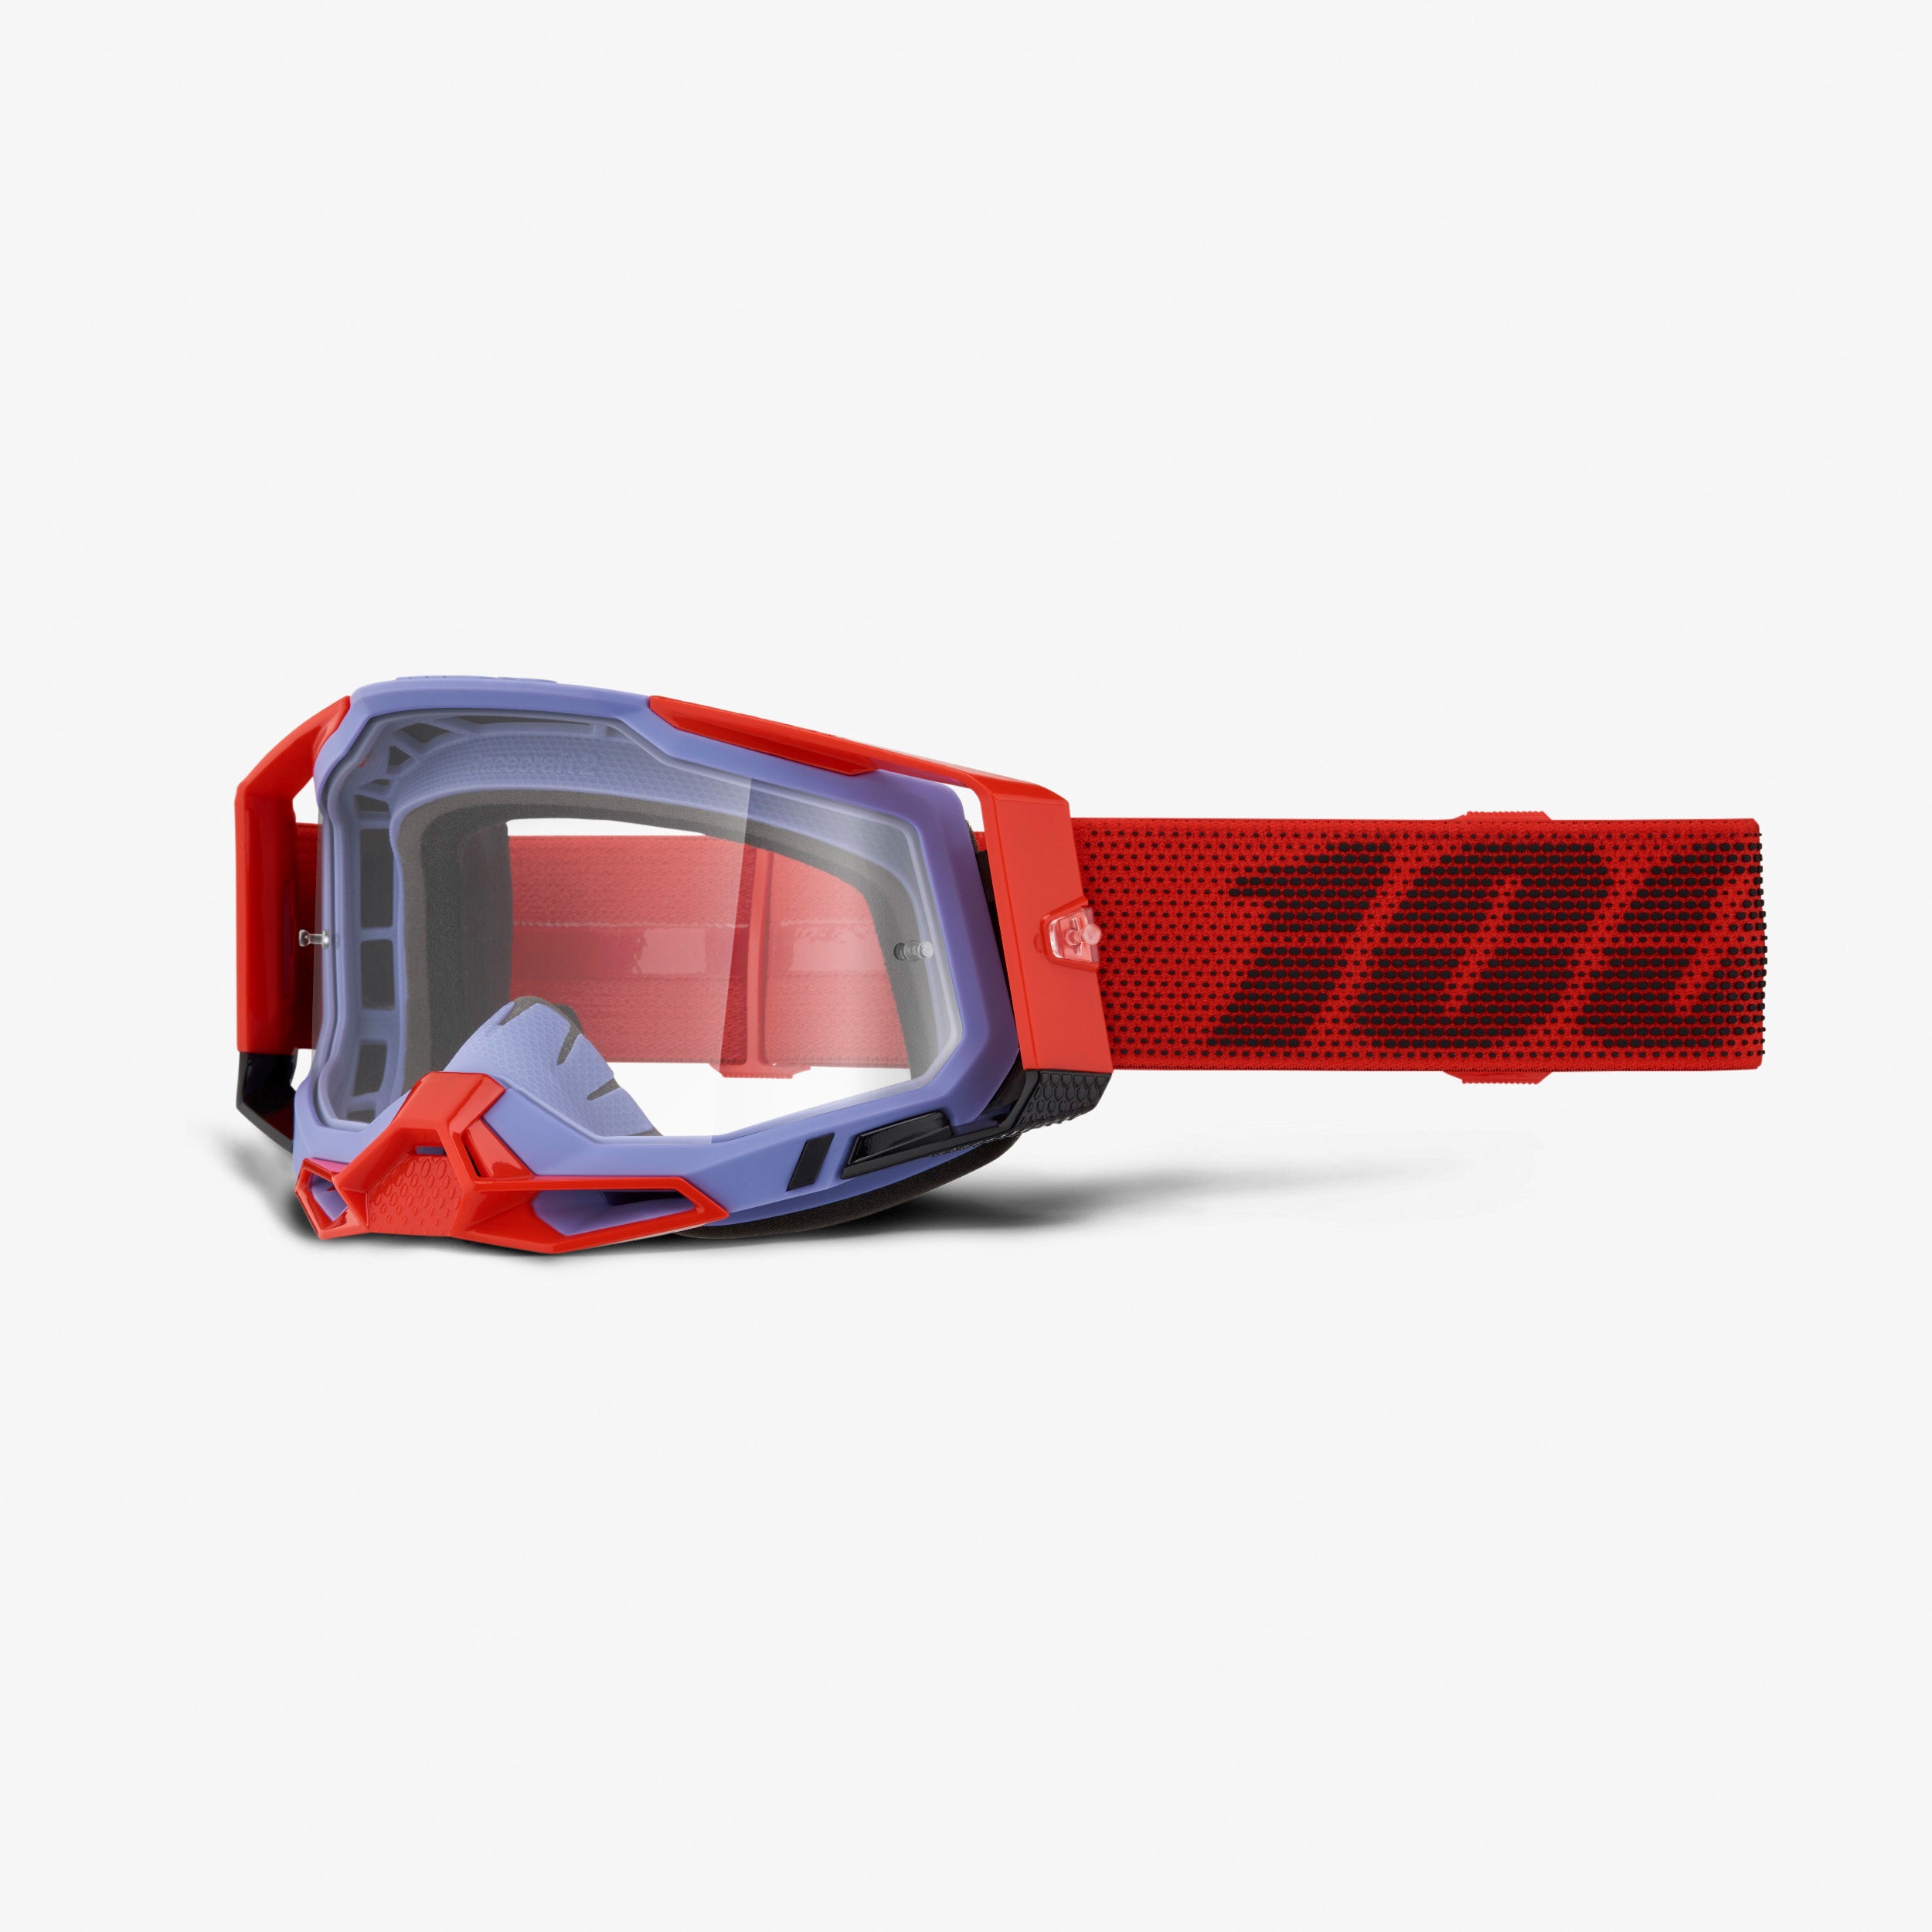 RACECRAFT 2 Goggle Cleat - Secondary